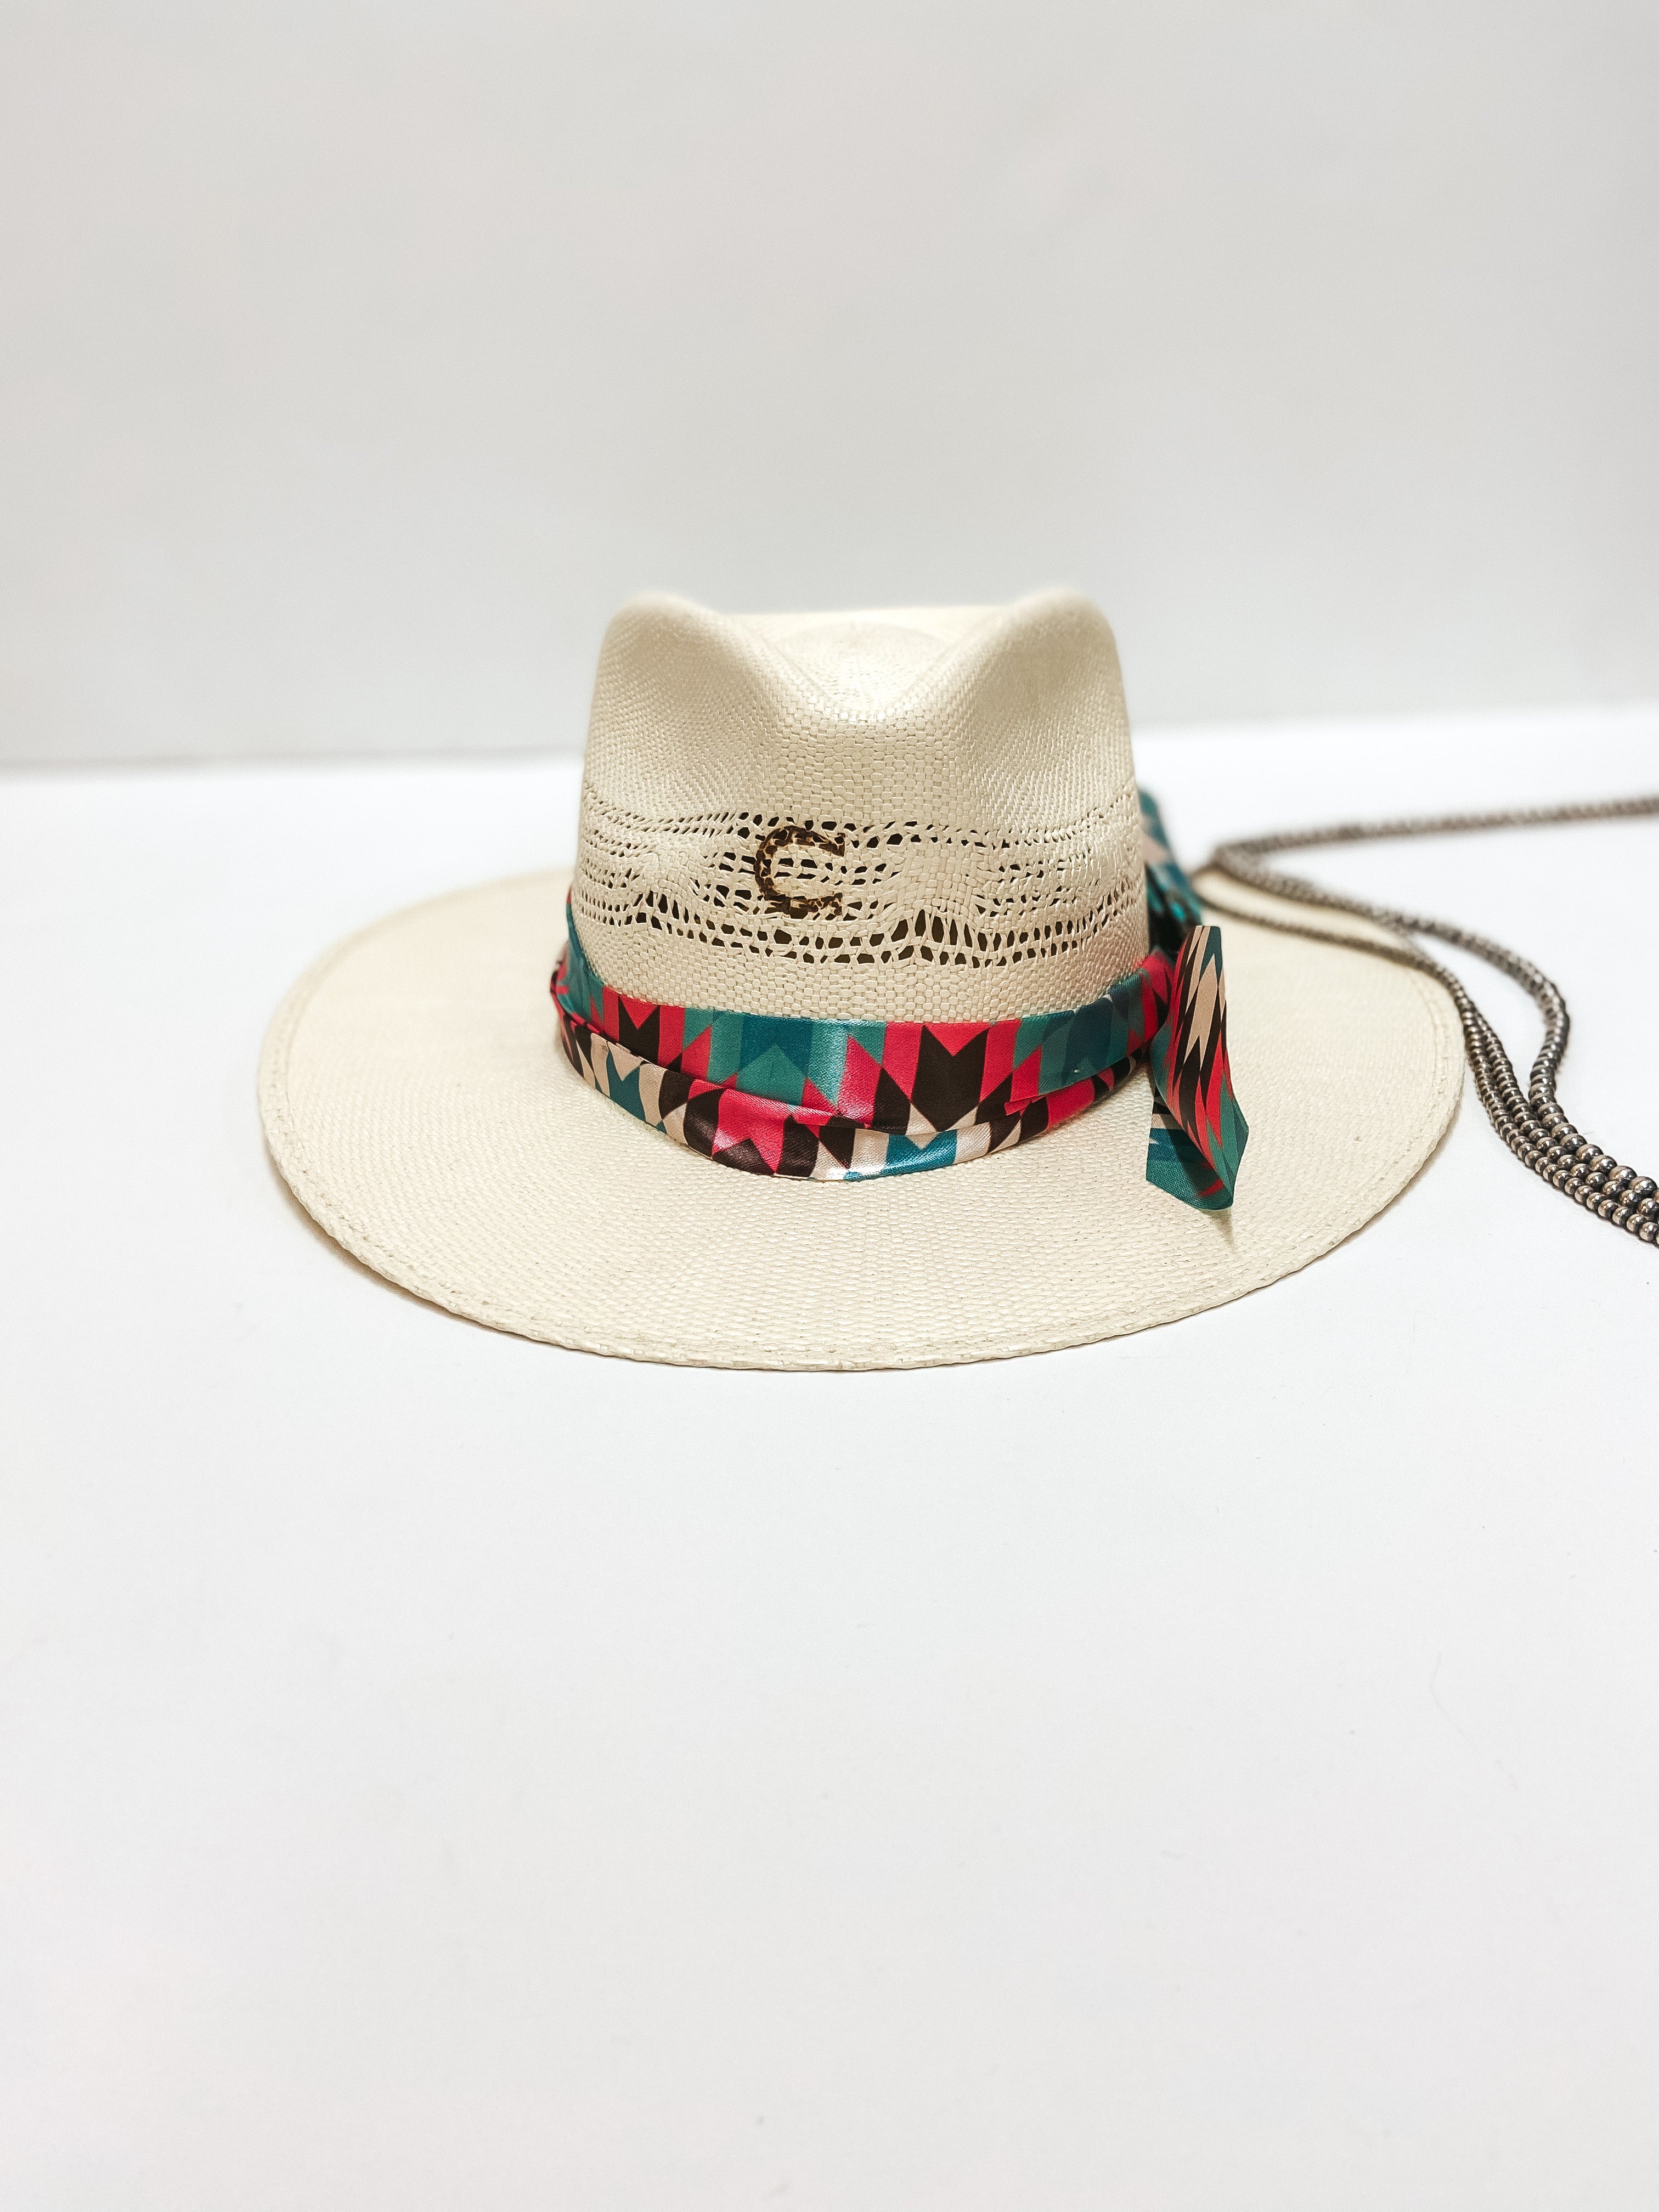 Charlie 1 Horse | Hissy Fit Straw Hat with Aztec Print Ribbon Band and Silver and Turquoise Concho Pin